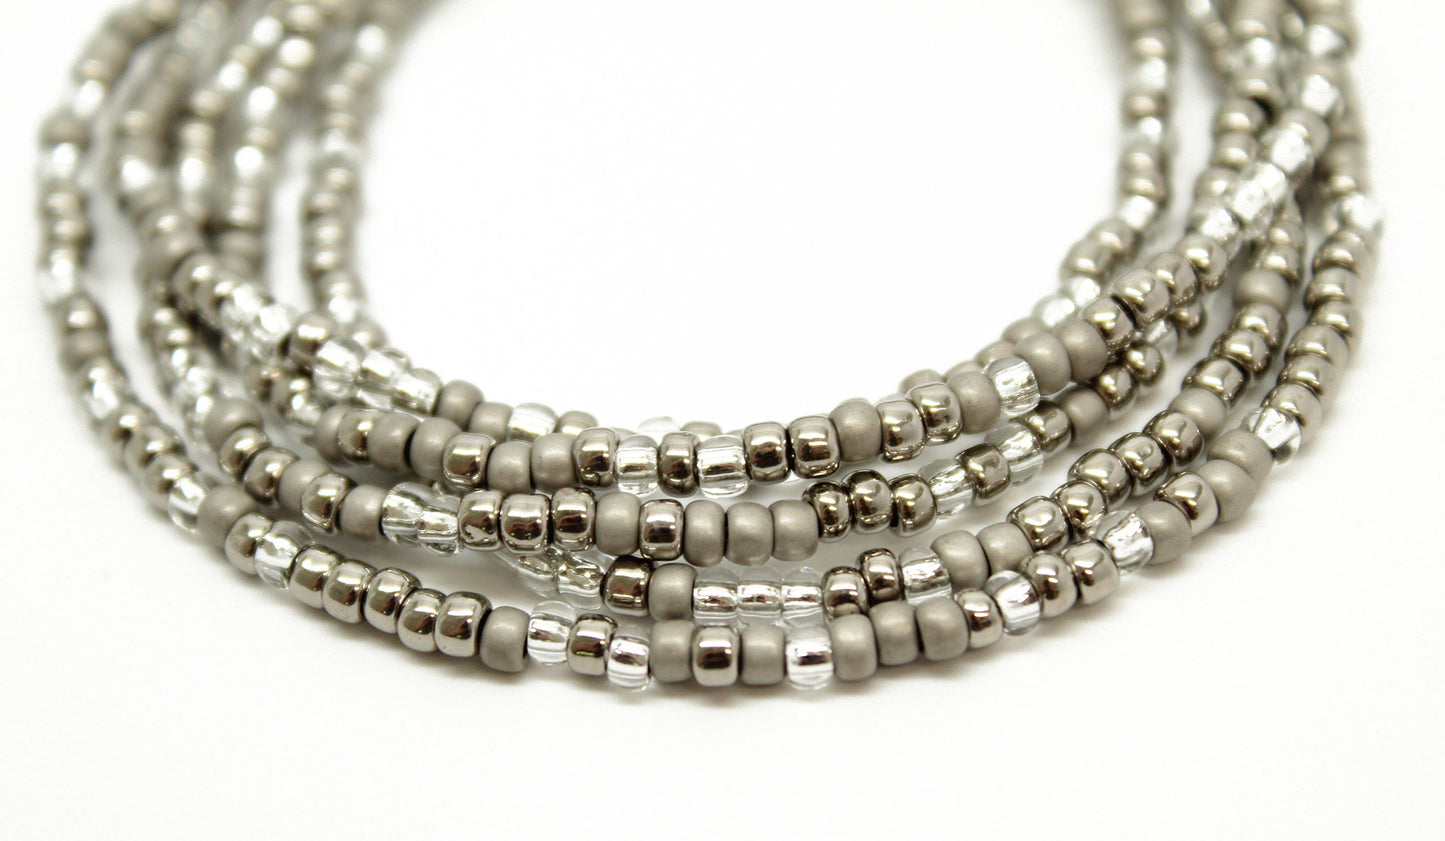 Silver and grey seed bead necklace